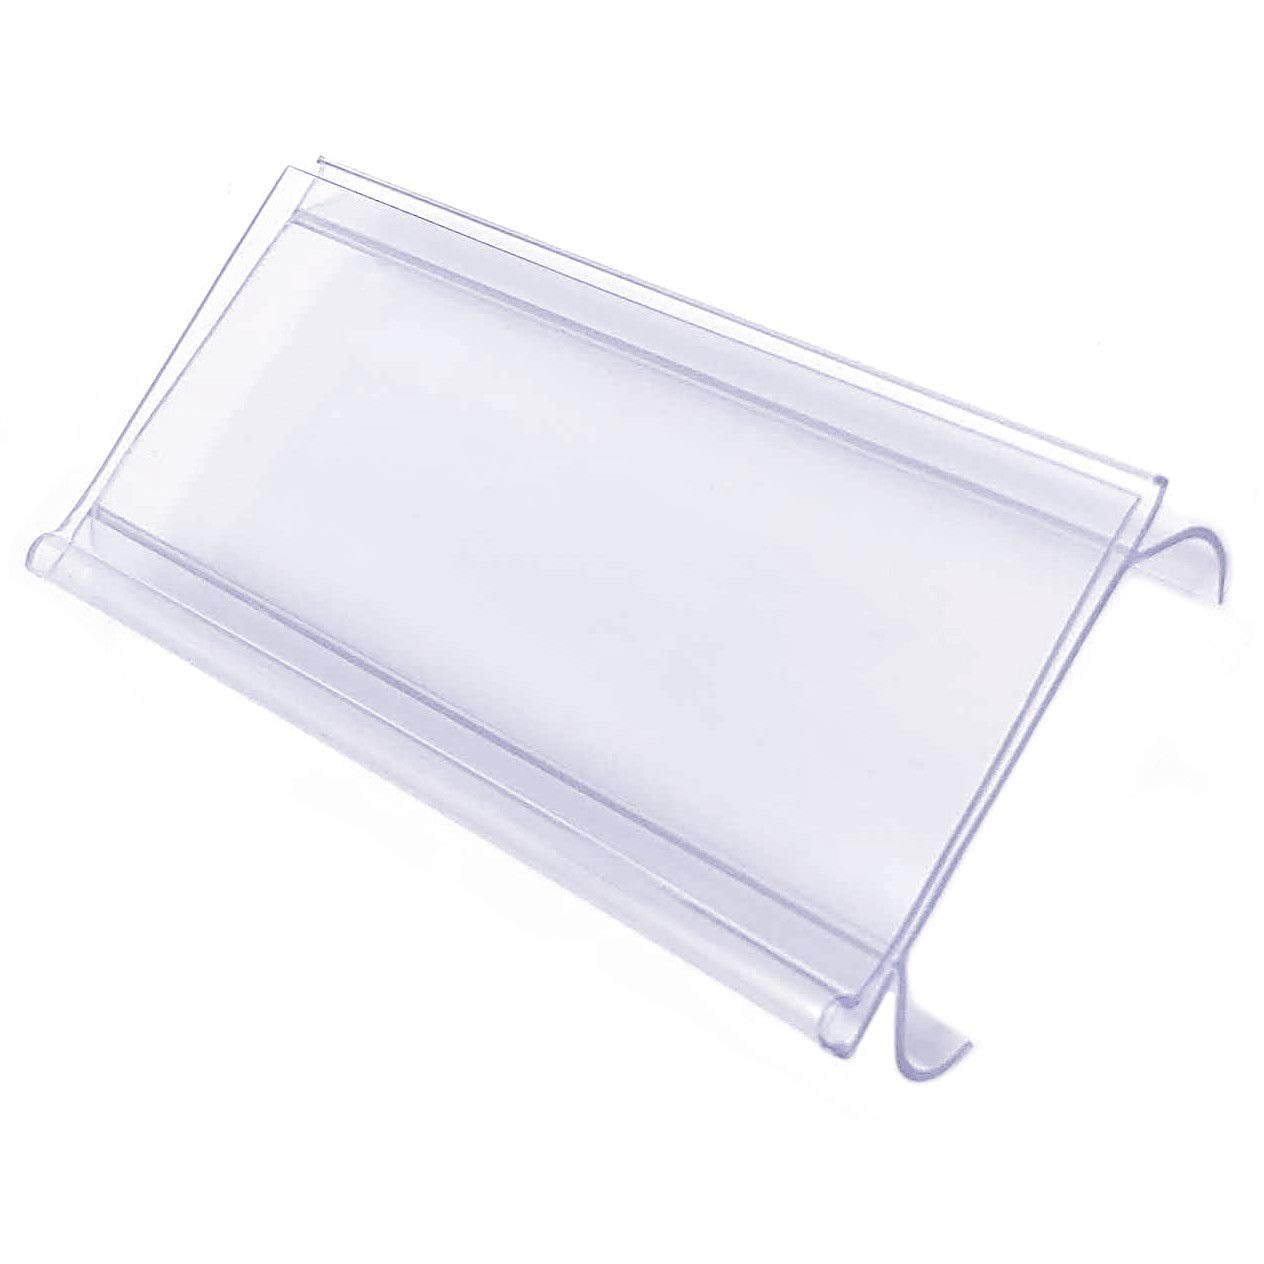 30 Pieces Plastic Label Holder Wire Shelf Label Holder 3 x 7/8 Inches Clip on Tag Holders Ticket Holder 